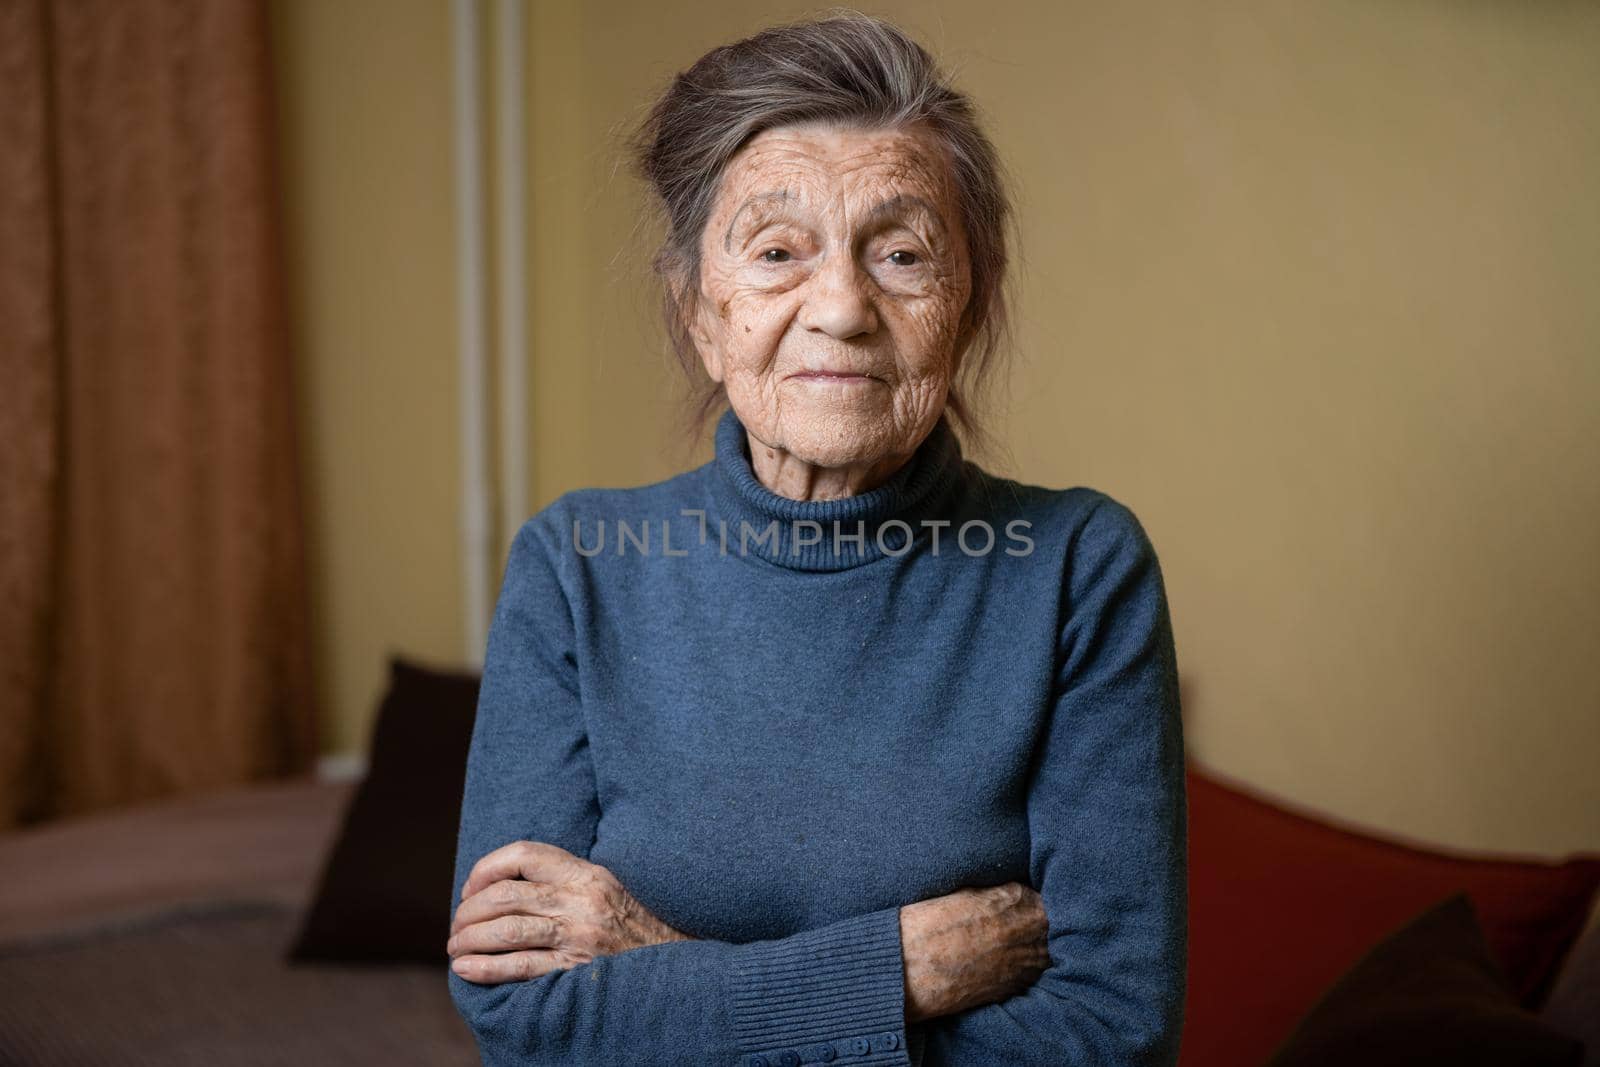 90 year old cute elderly woman with gray hair and wrinkles face, wearing sweater, portrait large, smiling and looking joyfully, background of room. Theme long-liver and aging, old people in good mood by Tomashevska